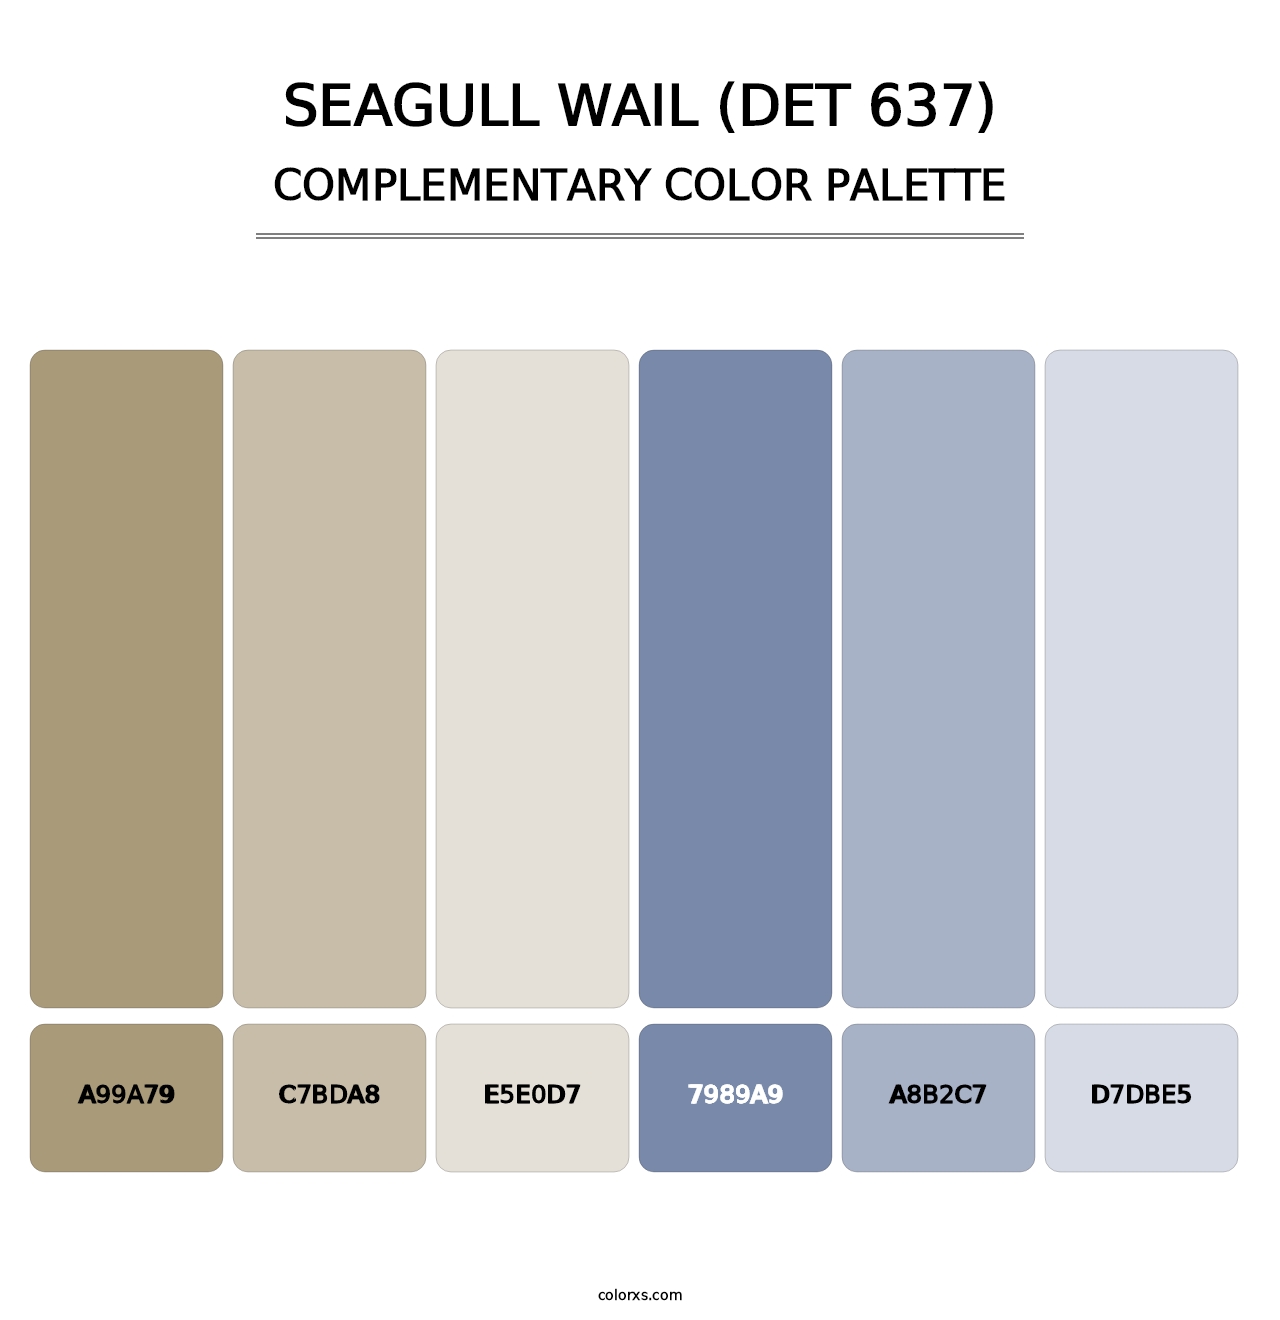 Seagull Wail (DET 637) - Complementary Color Palette